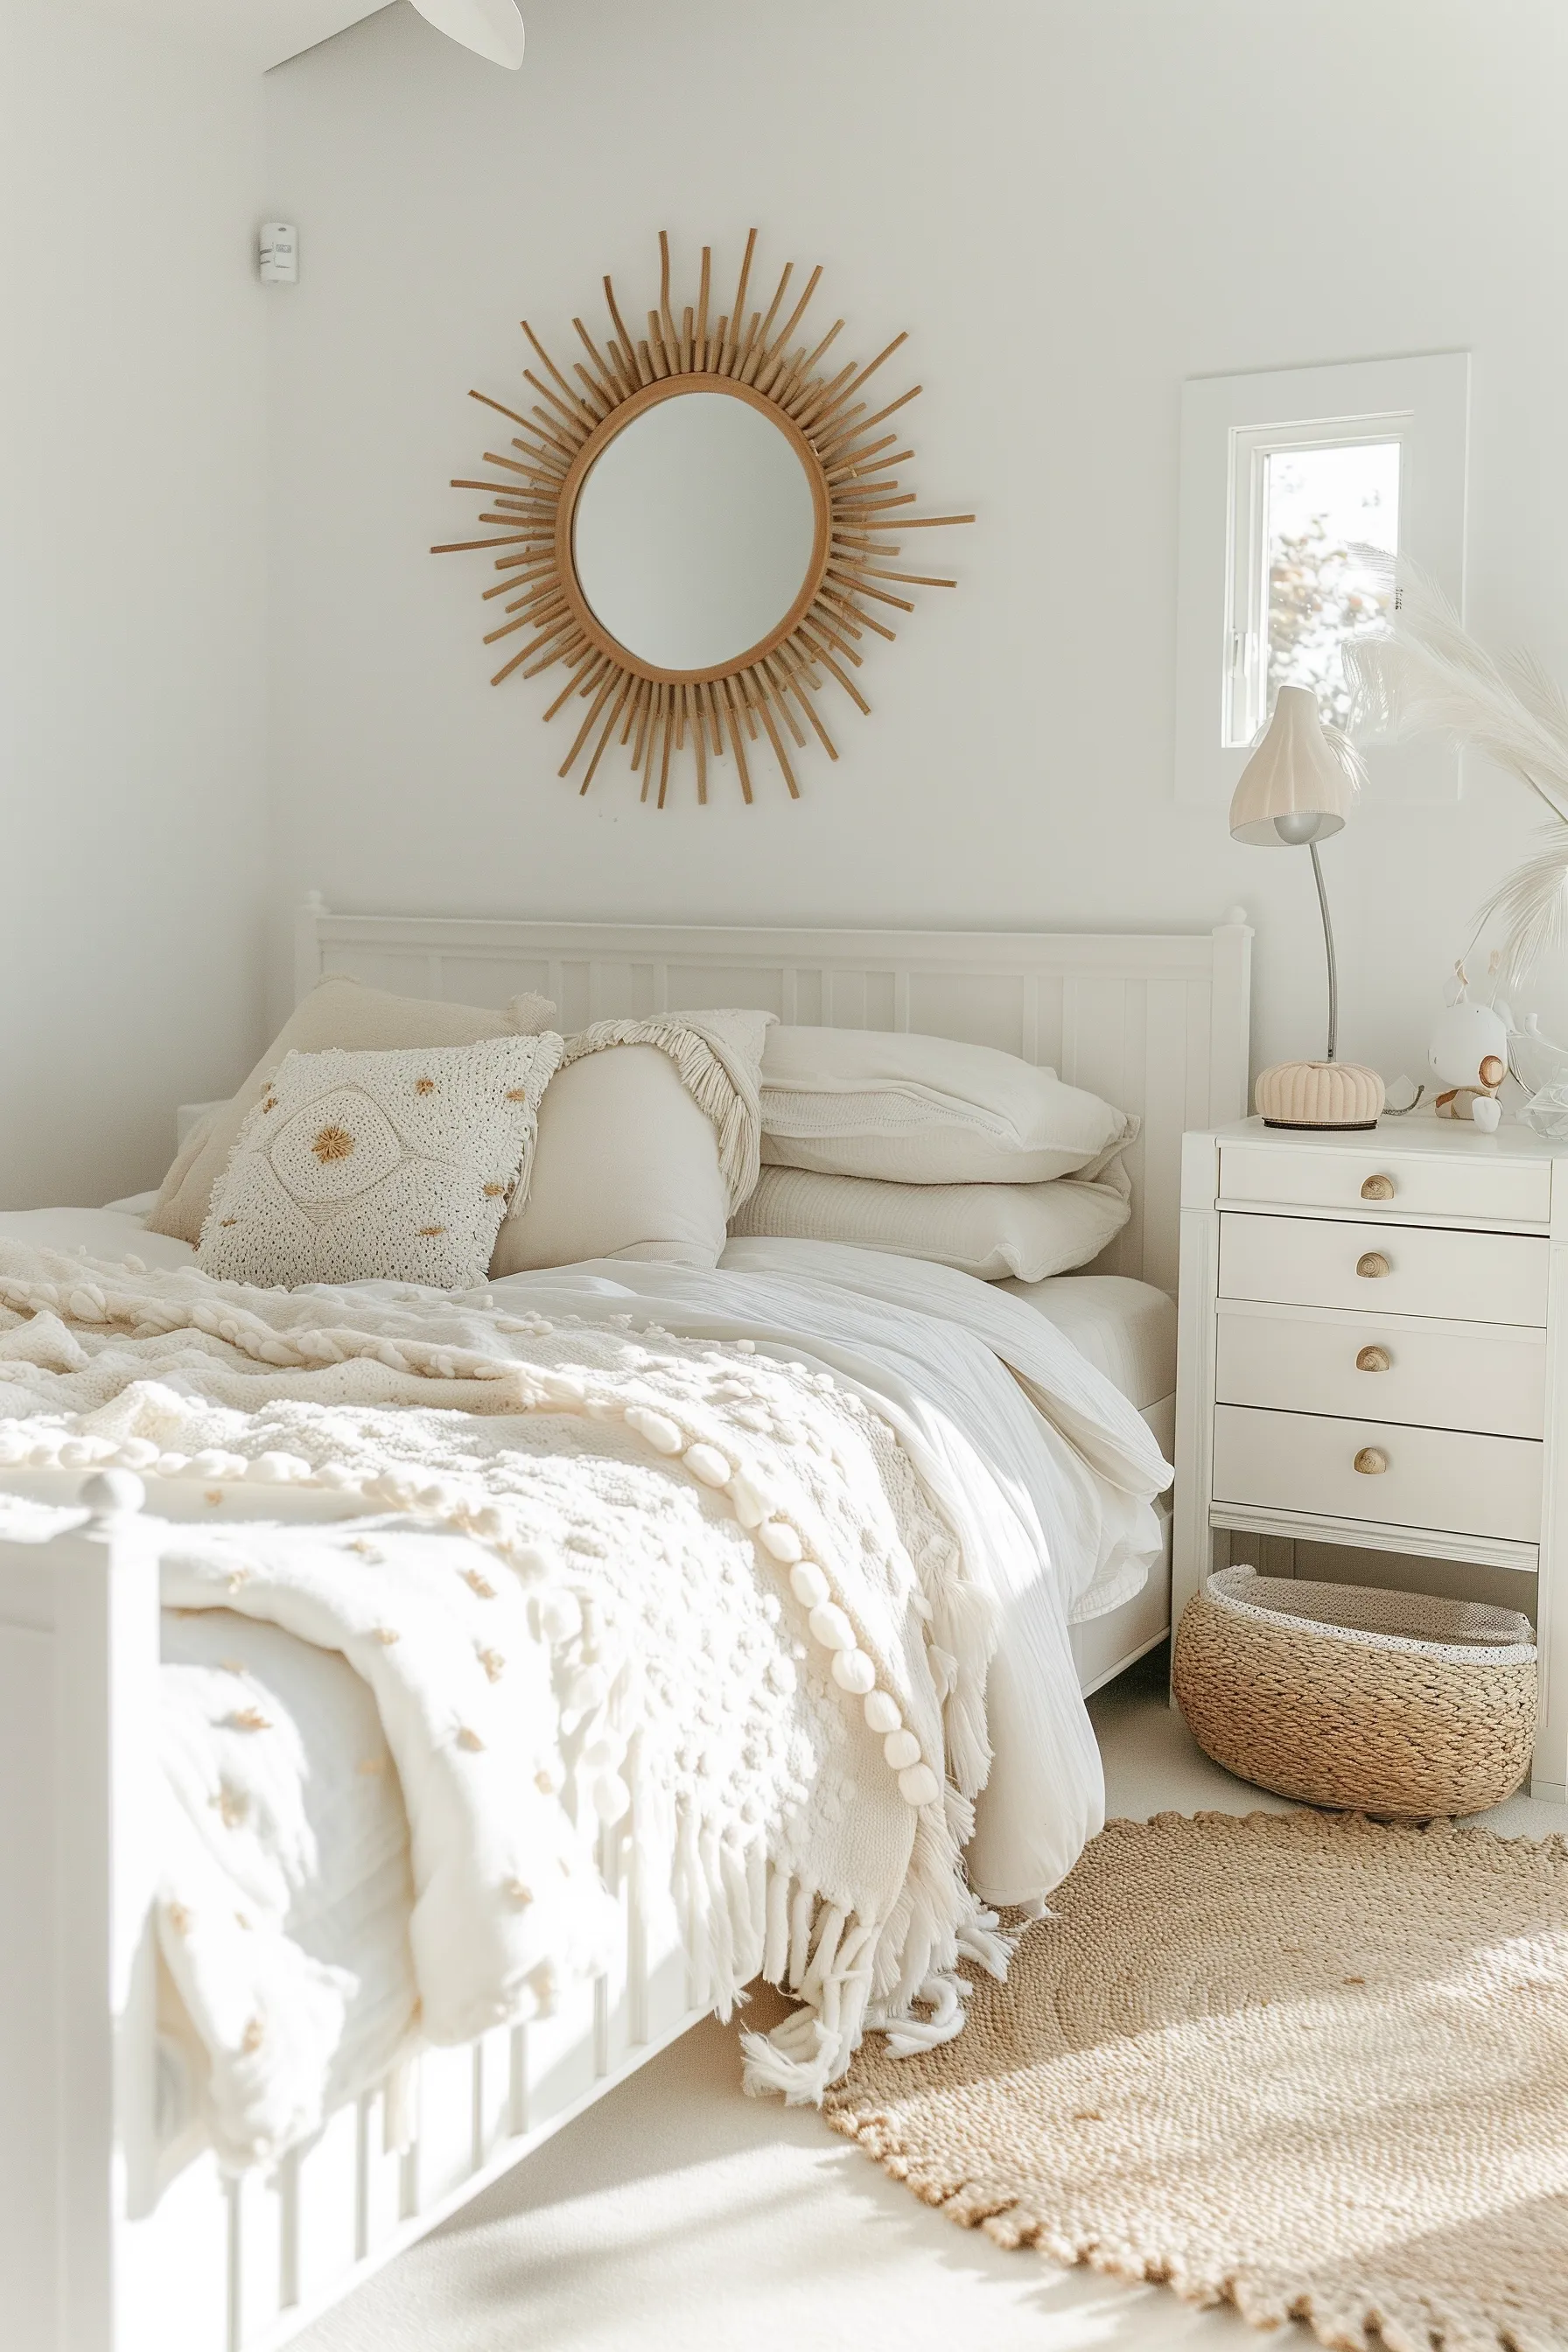 This sunny aesthetic little girls bedroom features lots of yellow accents which you can easily change with paint colours. It also has white walls to make these accents really pop. There is lighting, and a rug